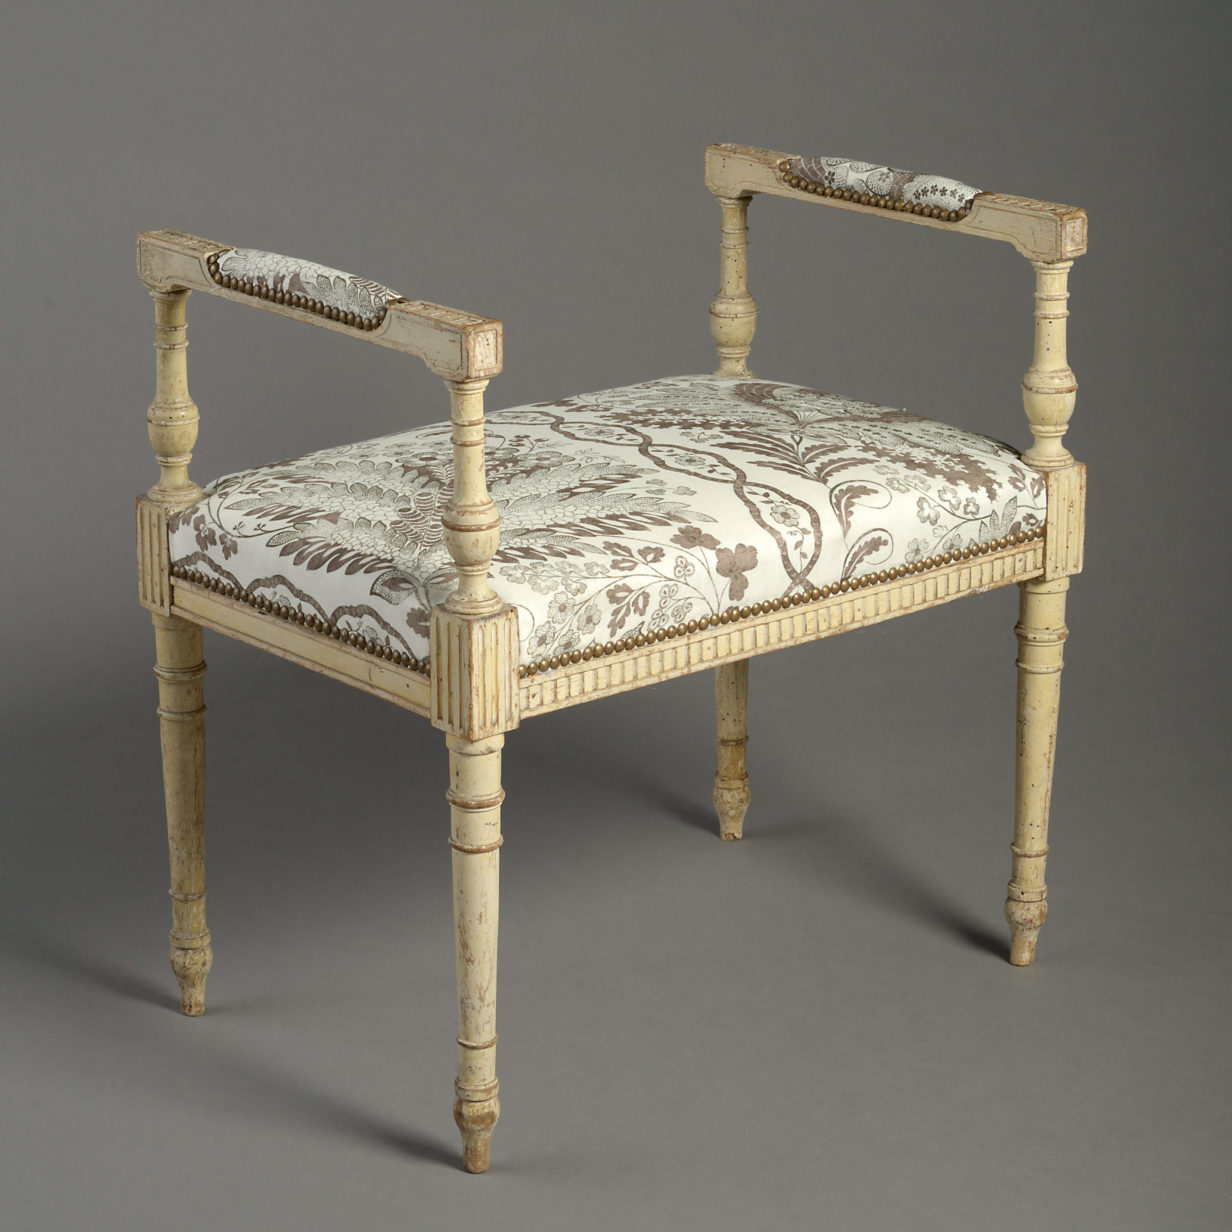 A 19th century painted stool in the louis xvi style